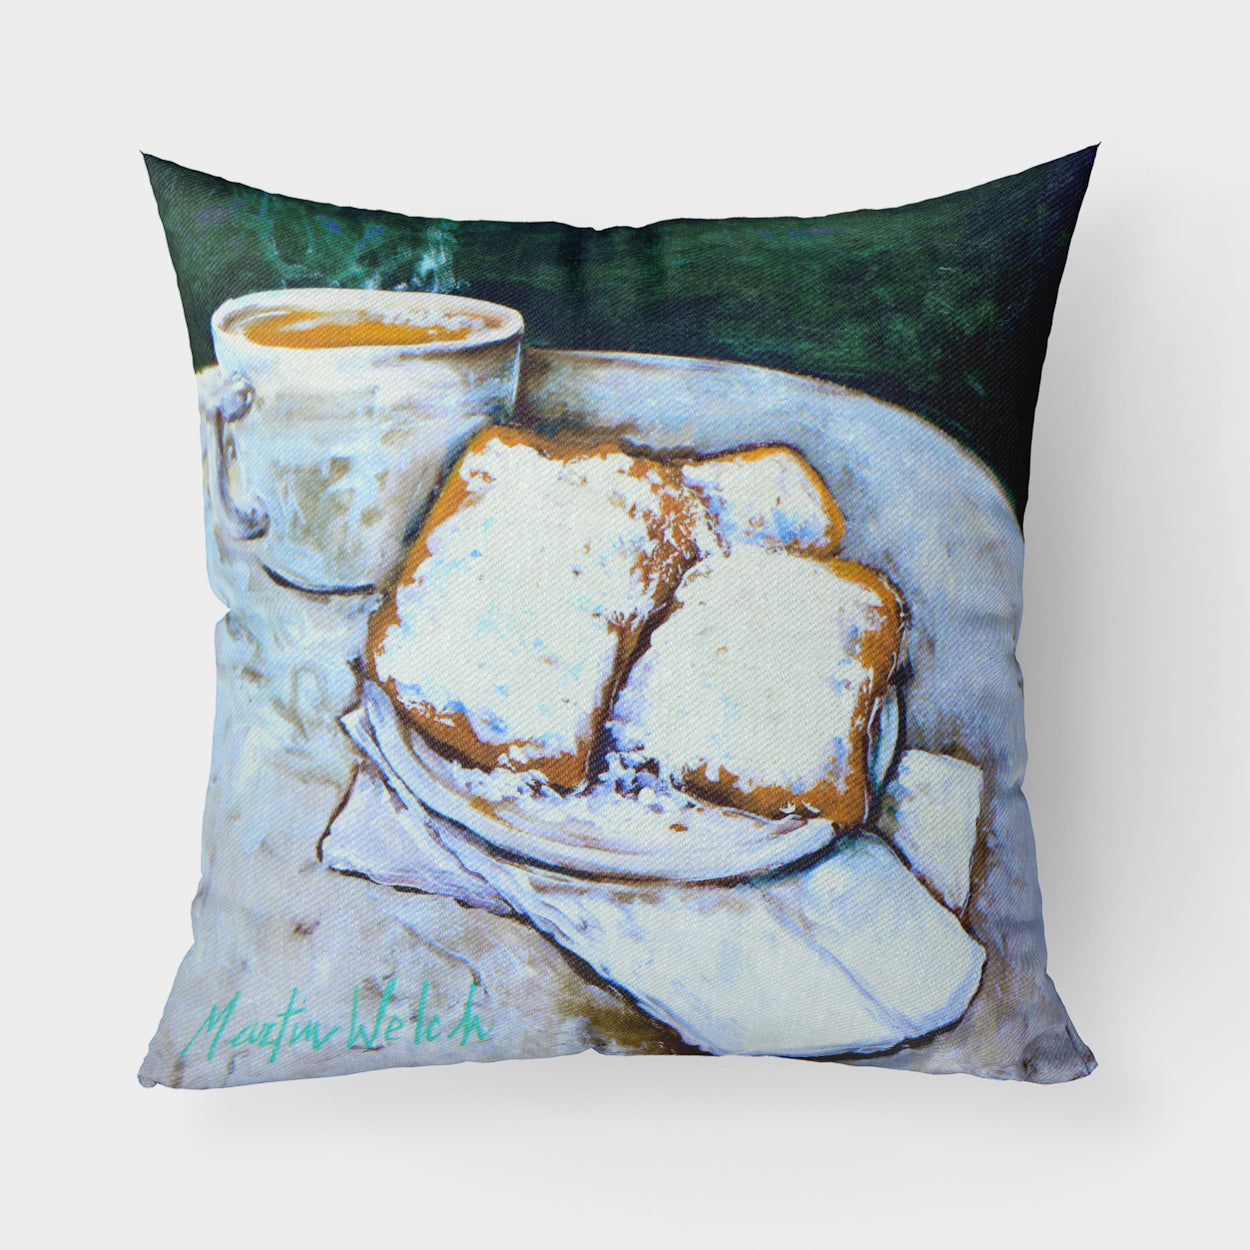 Buy this Beingets Breakfast Delight Fabric Decorative Pillow